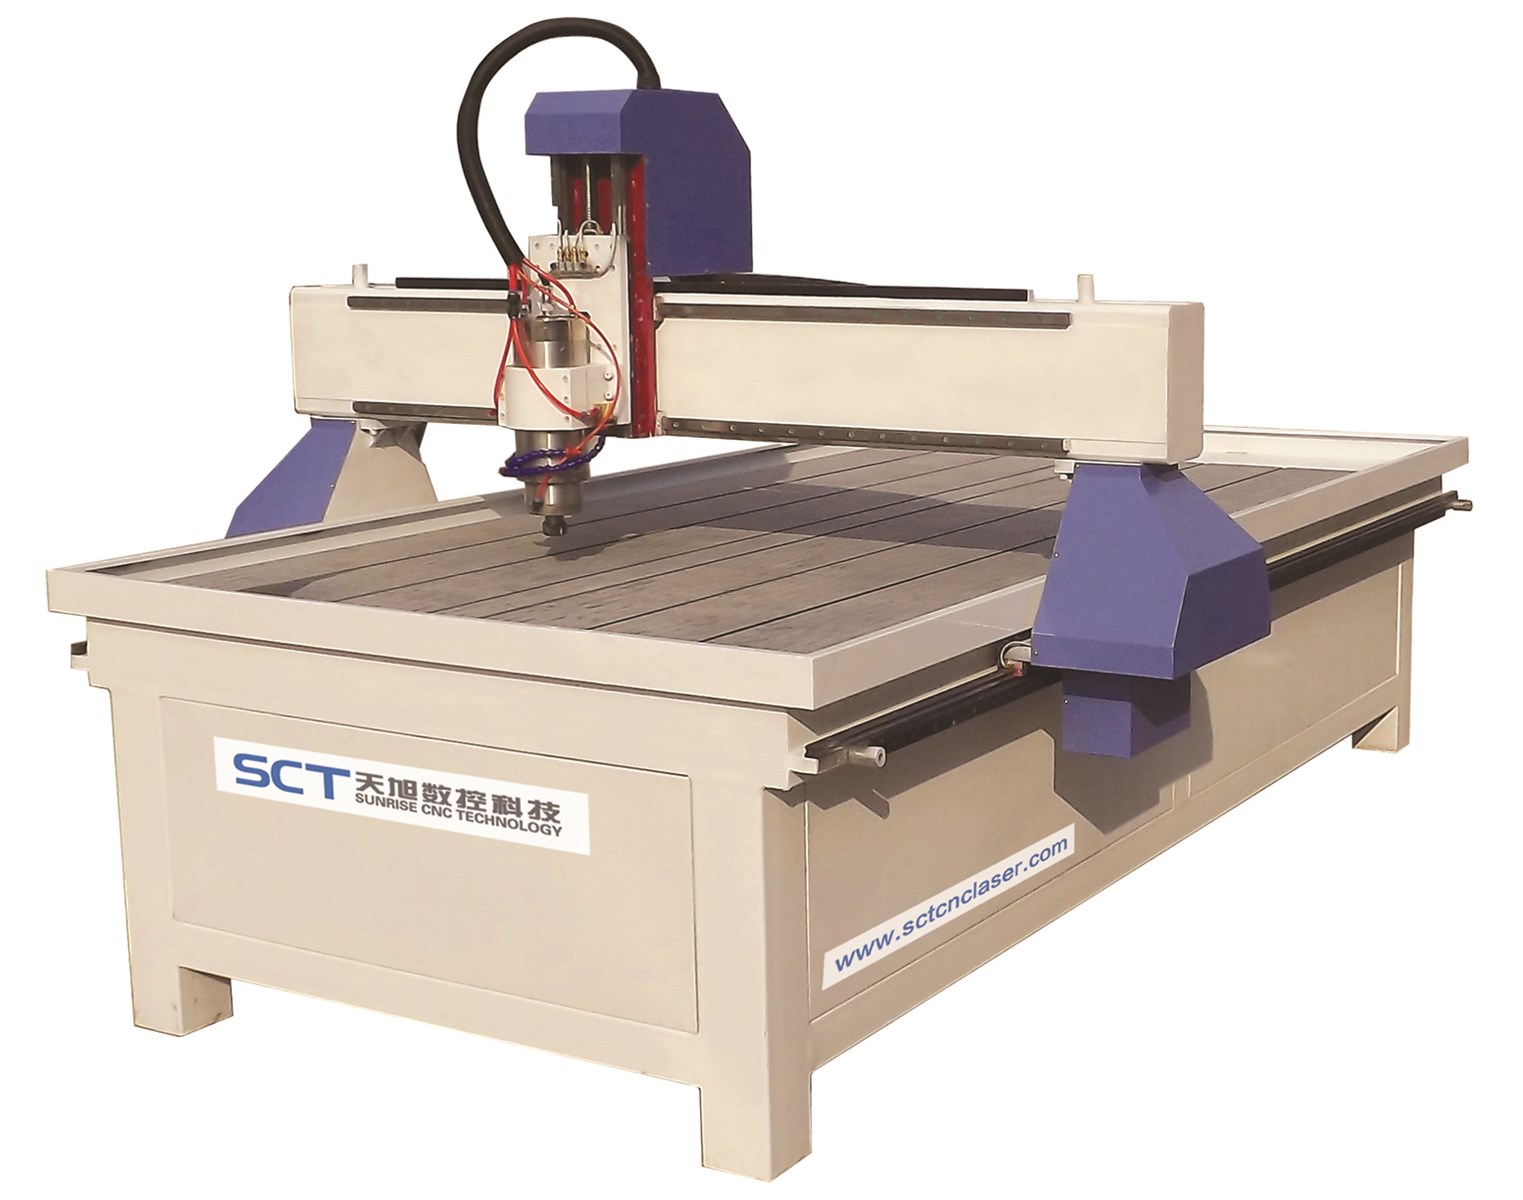 SCTS1212 Stone wood metal engraving cnc router